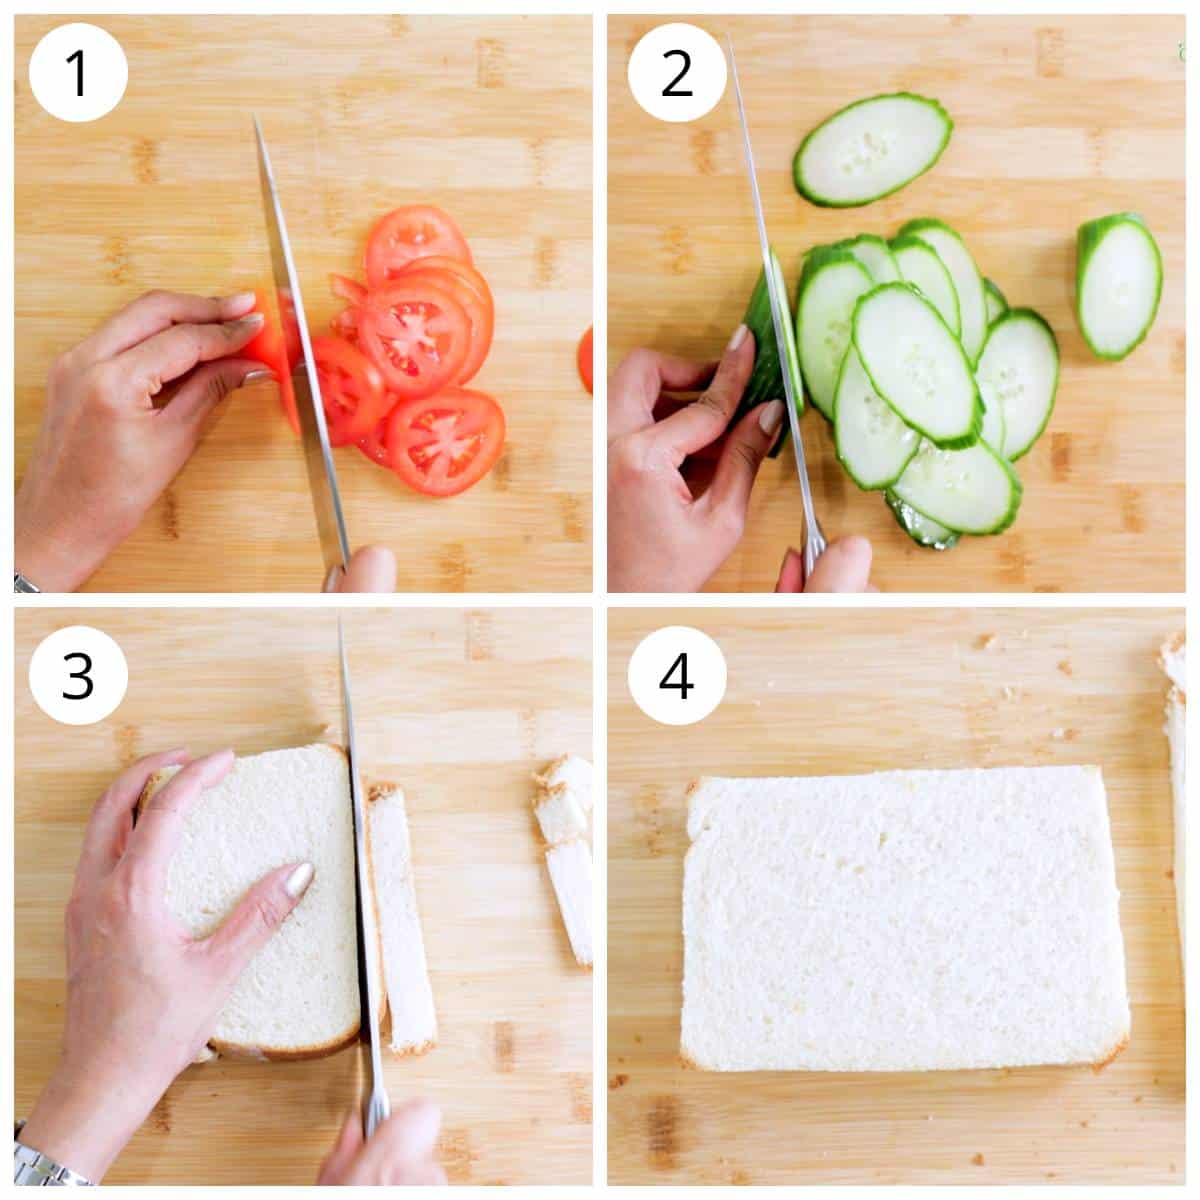 Steps showing cutting tomato, cucumber and bread sides